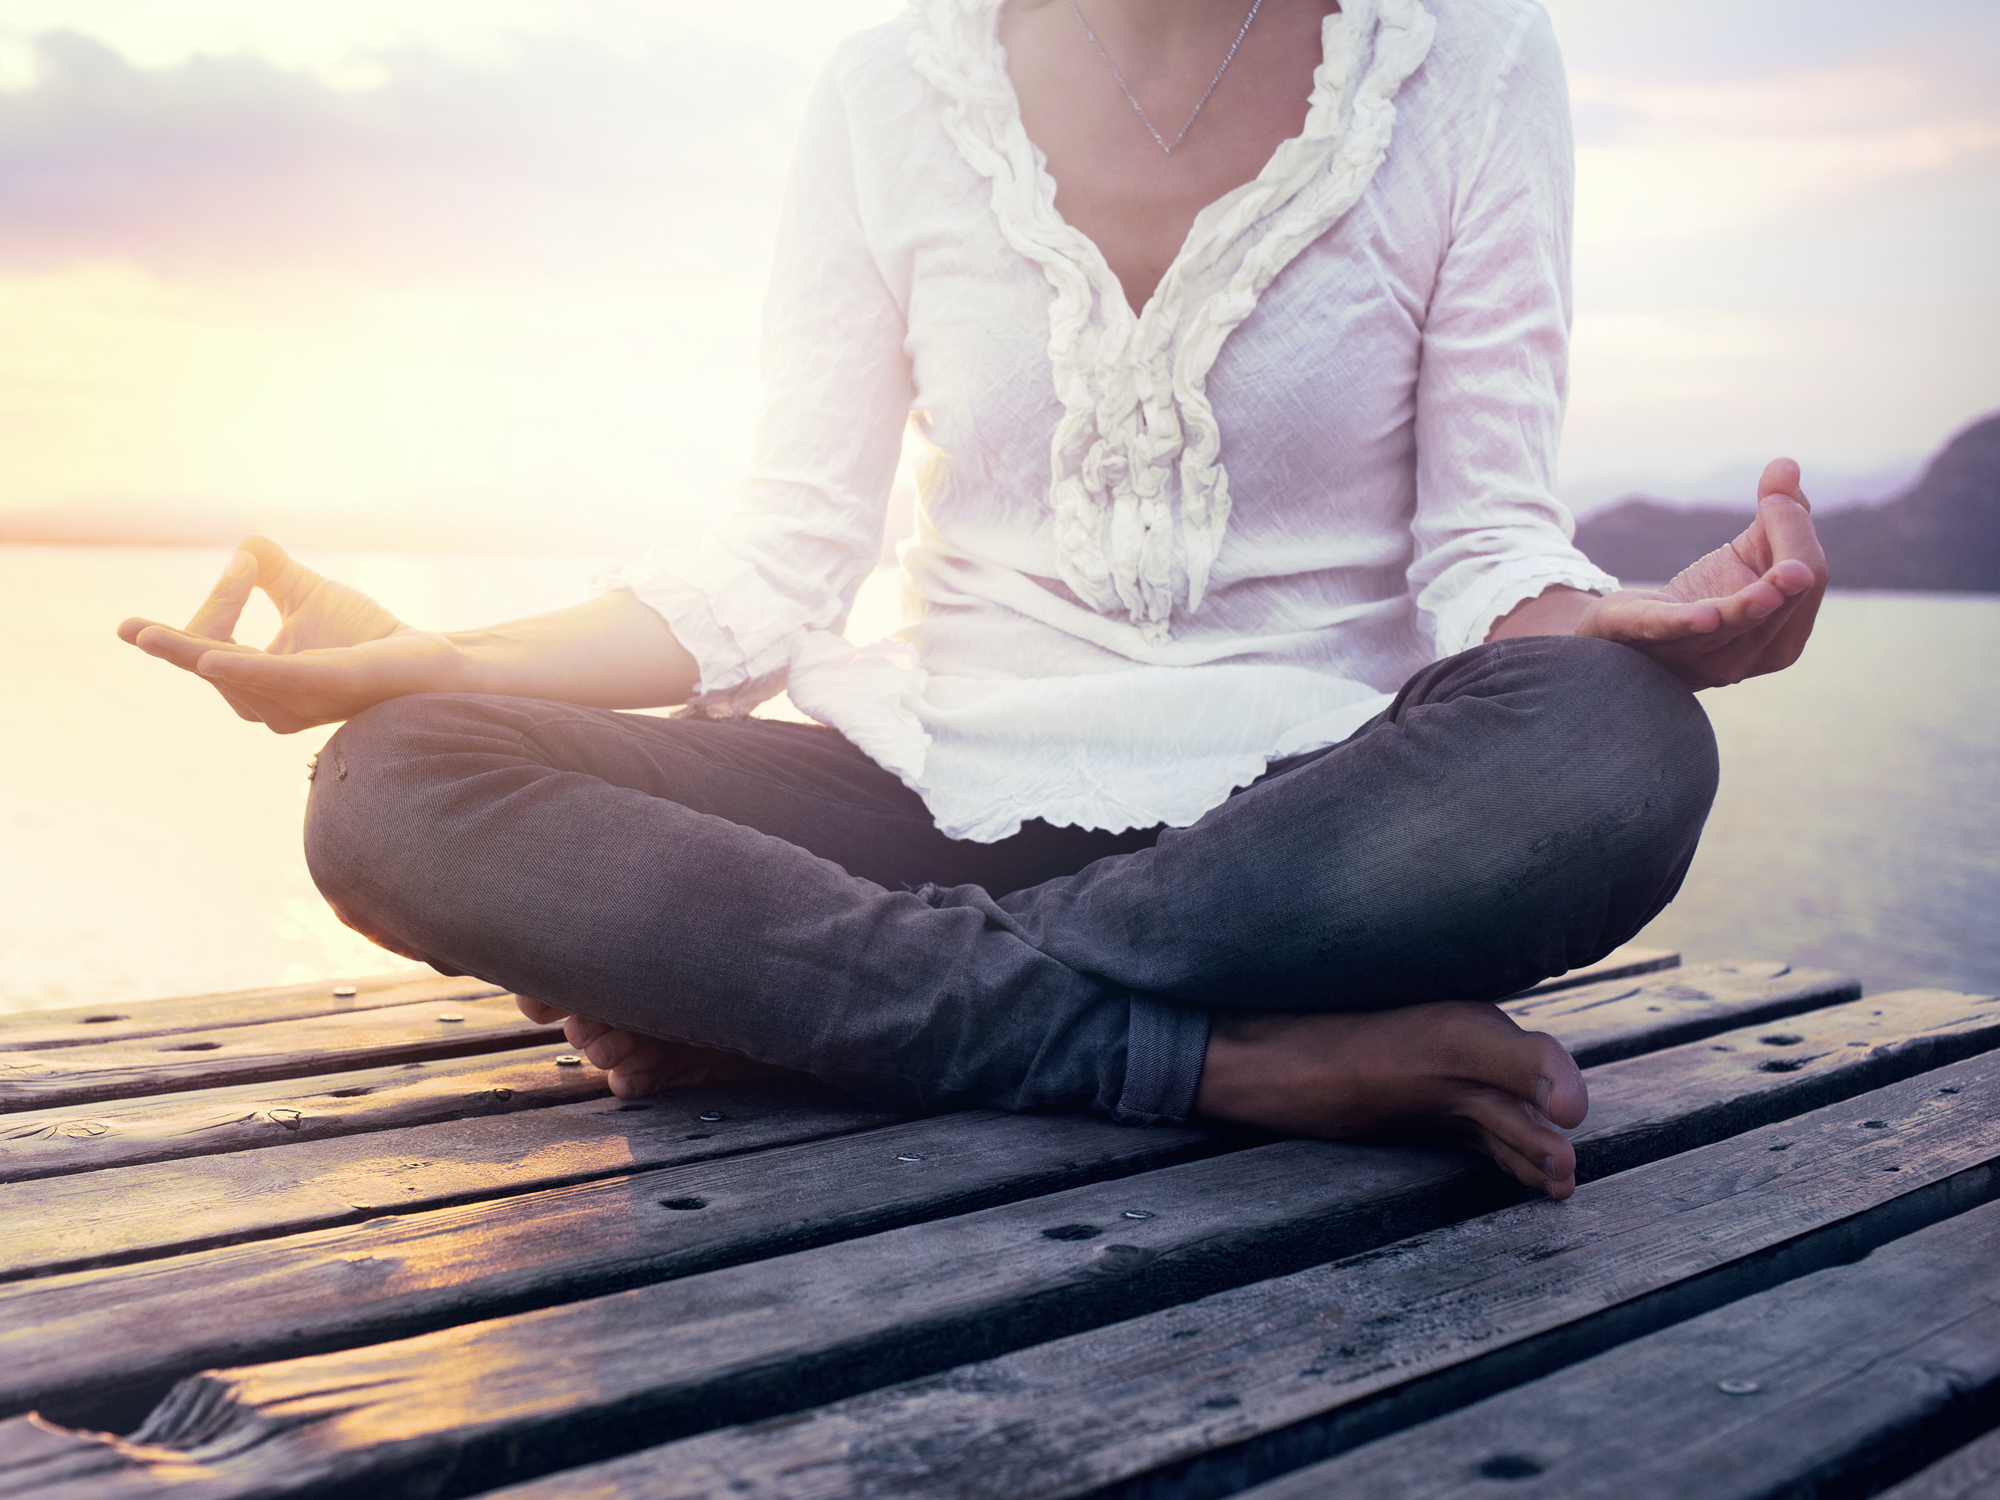 Improve focus and concentration through meditation